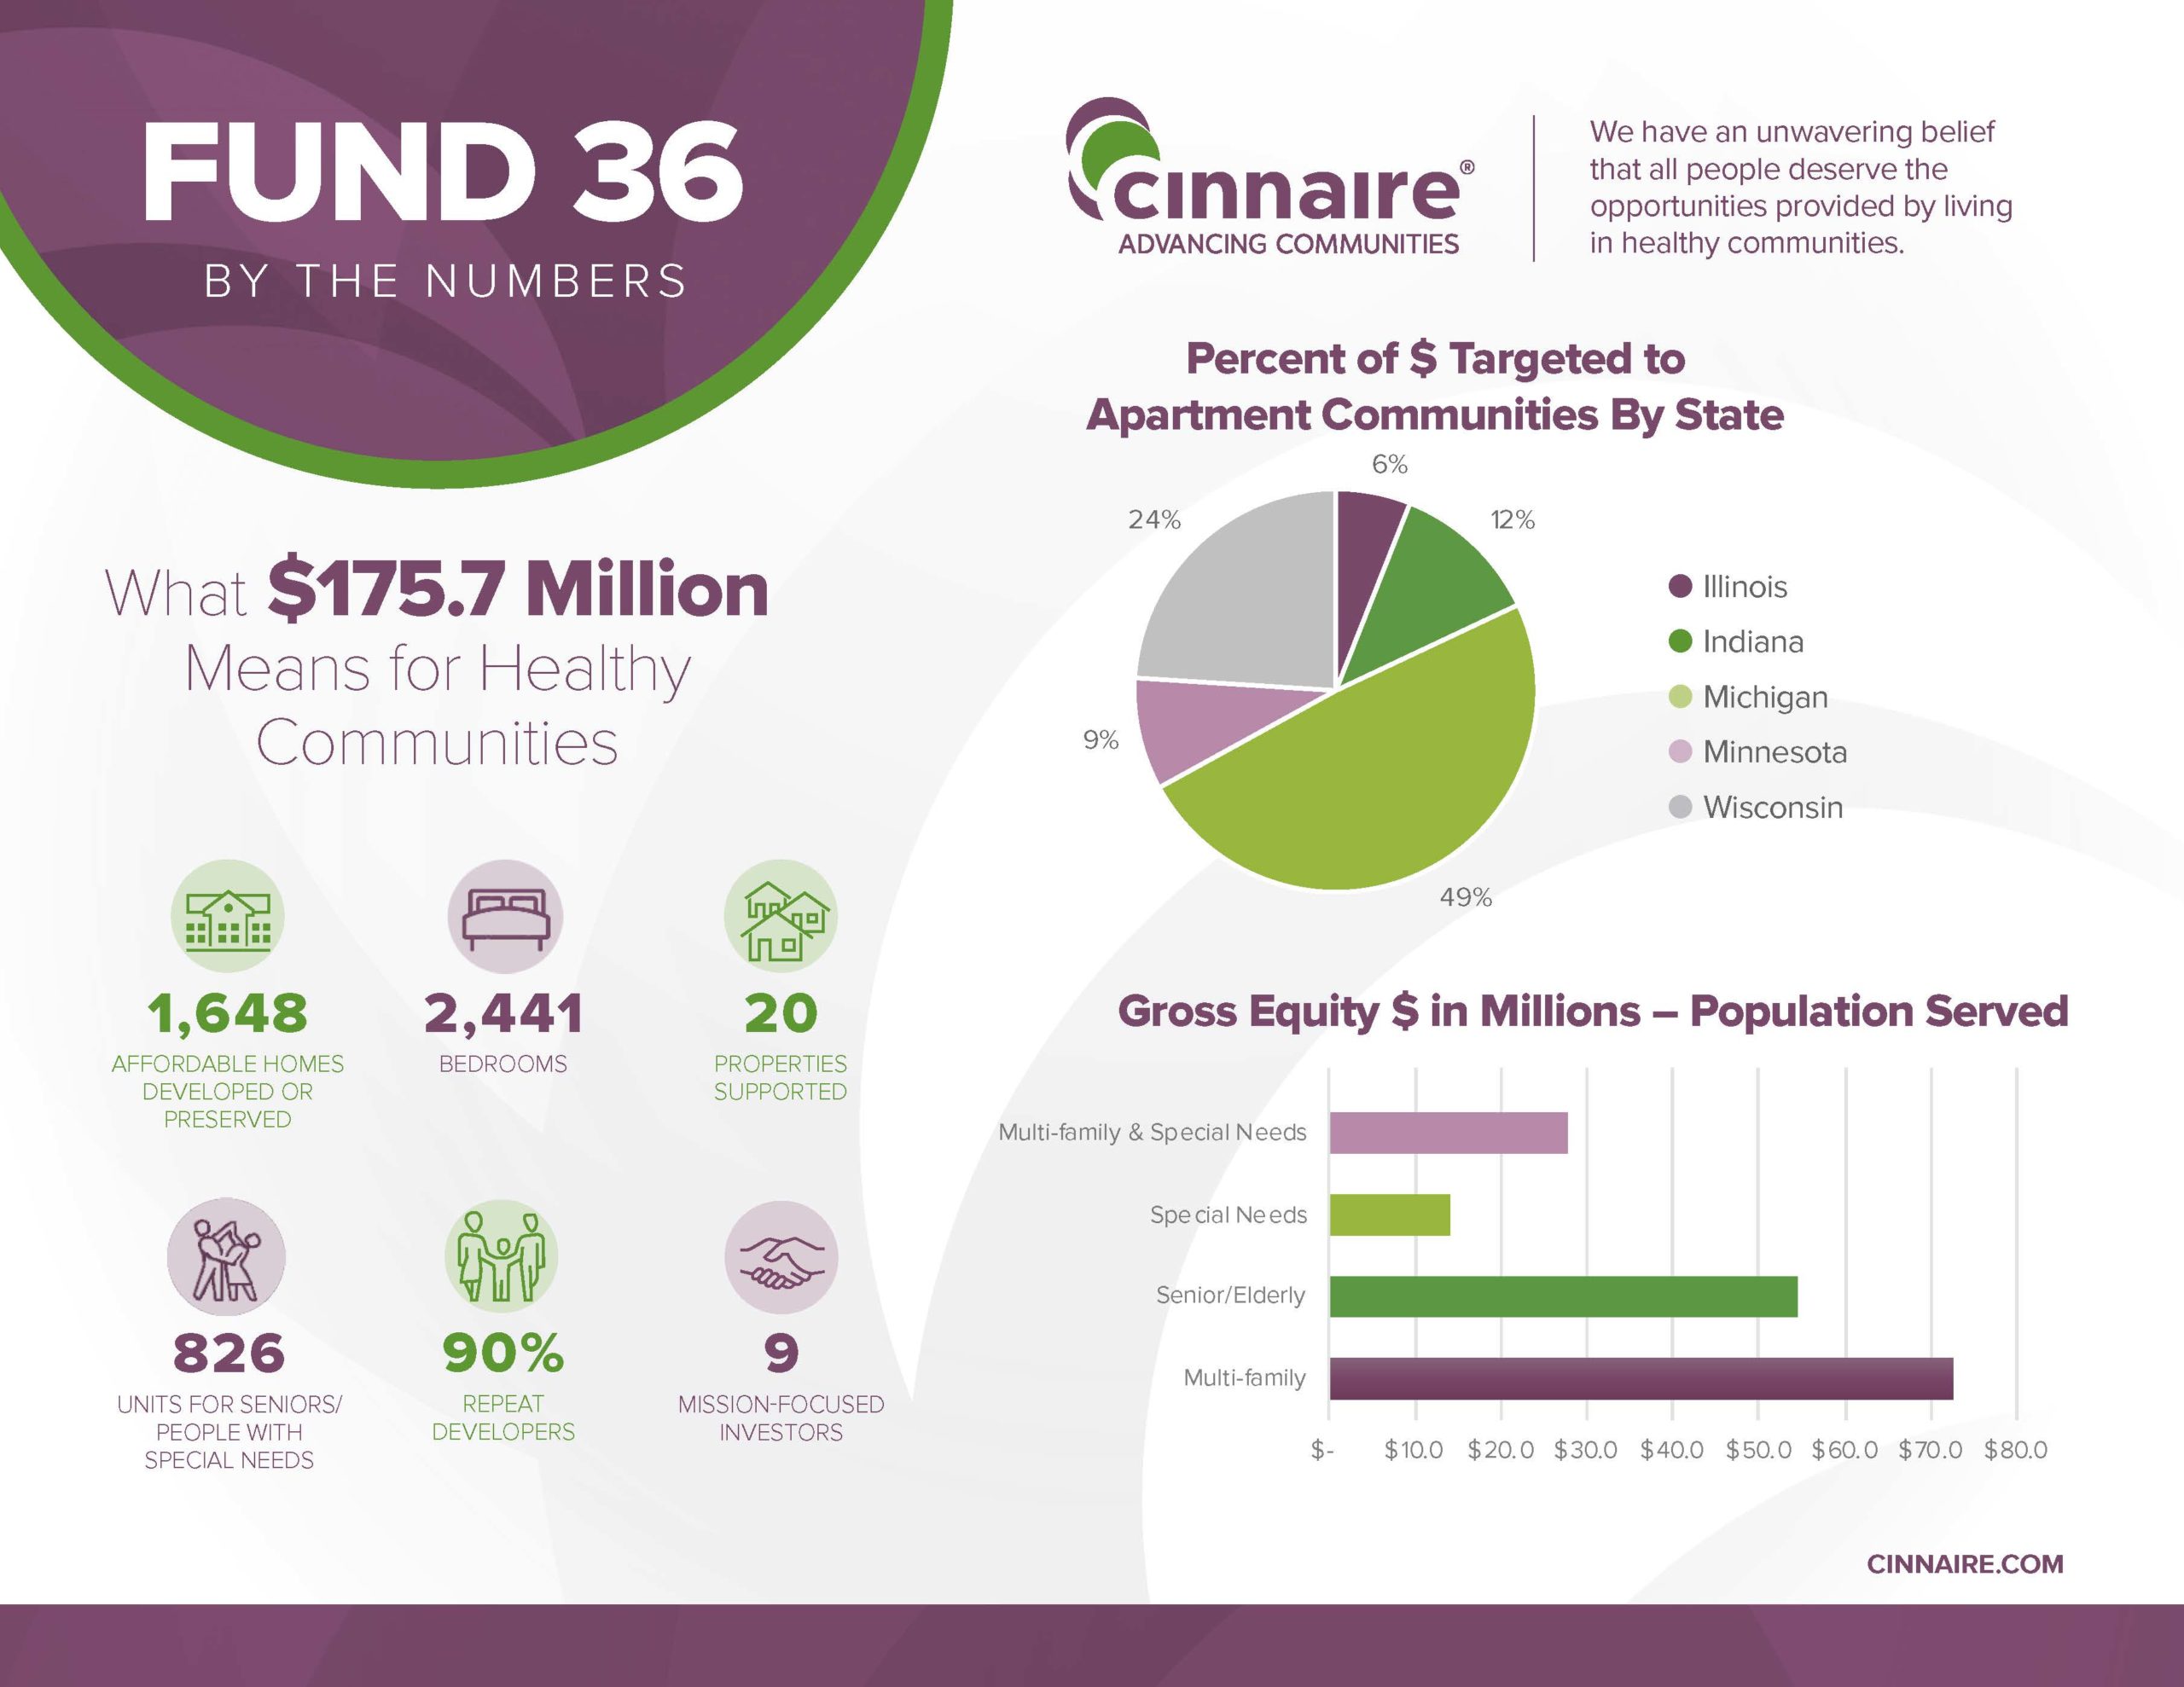 Cinnaire Announces $175.7 Million Fund to Support Affordable Housing